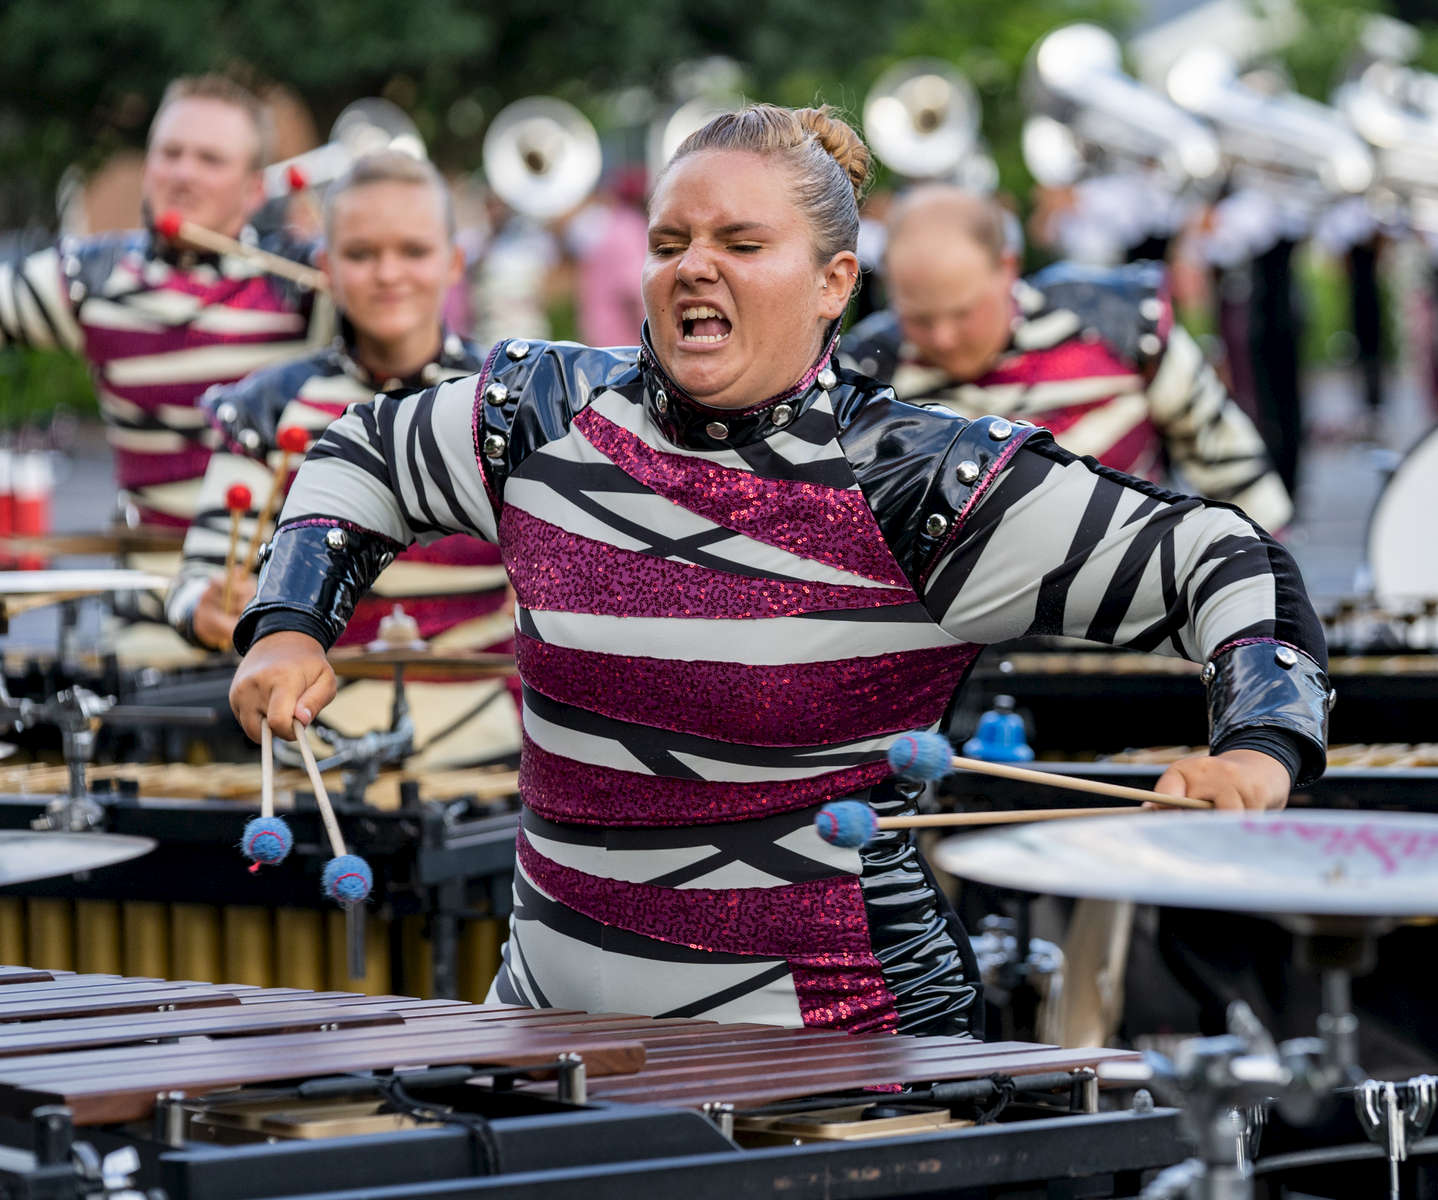 The Cadets in Akron, Ohio June 23,2018. This was their first show (Innovations in Brass) for 2018.